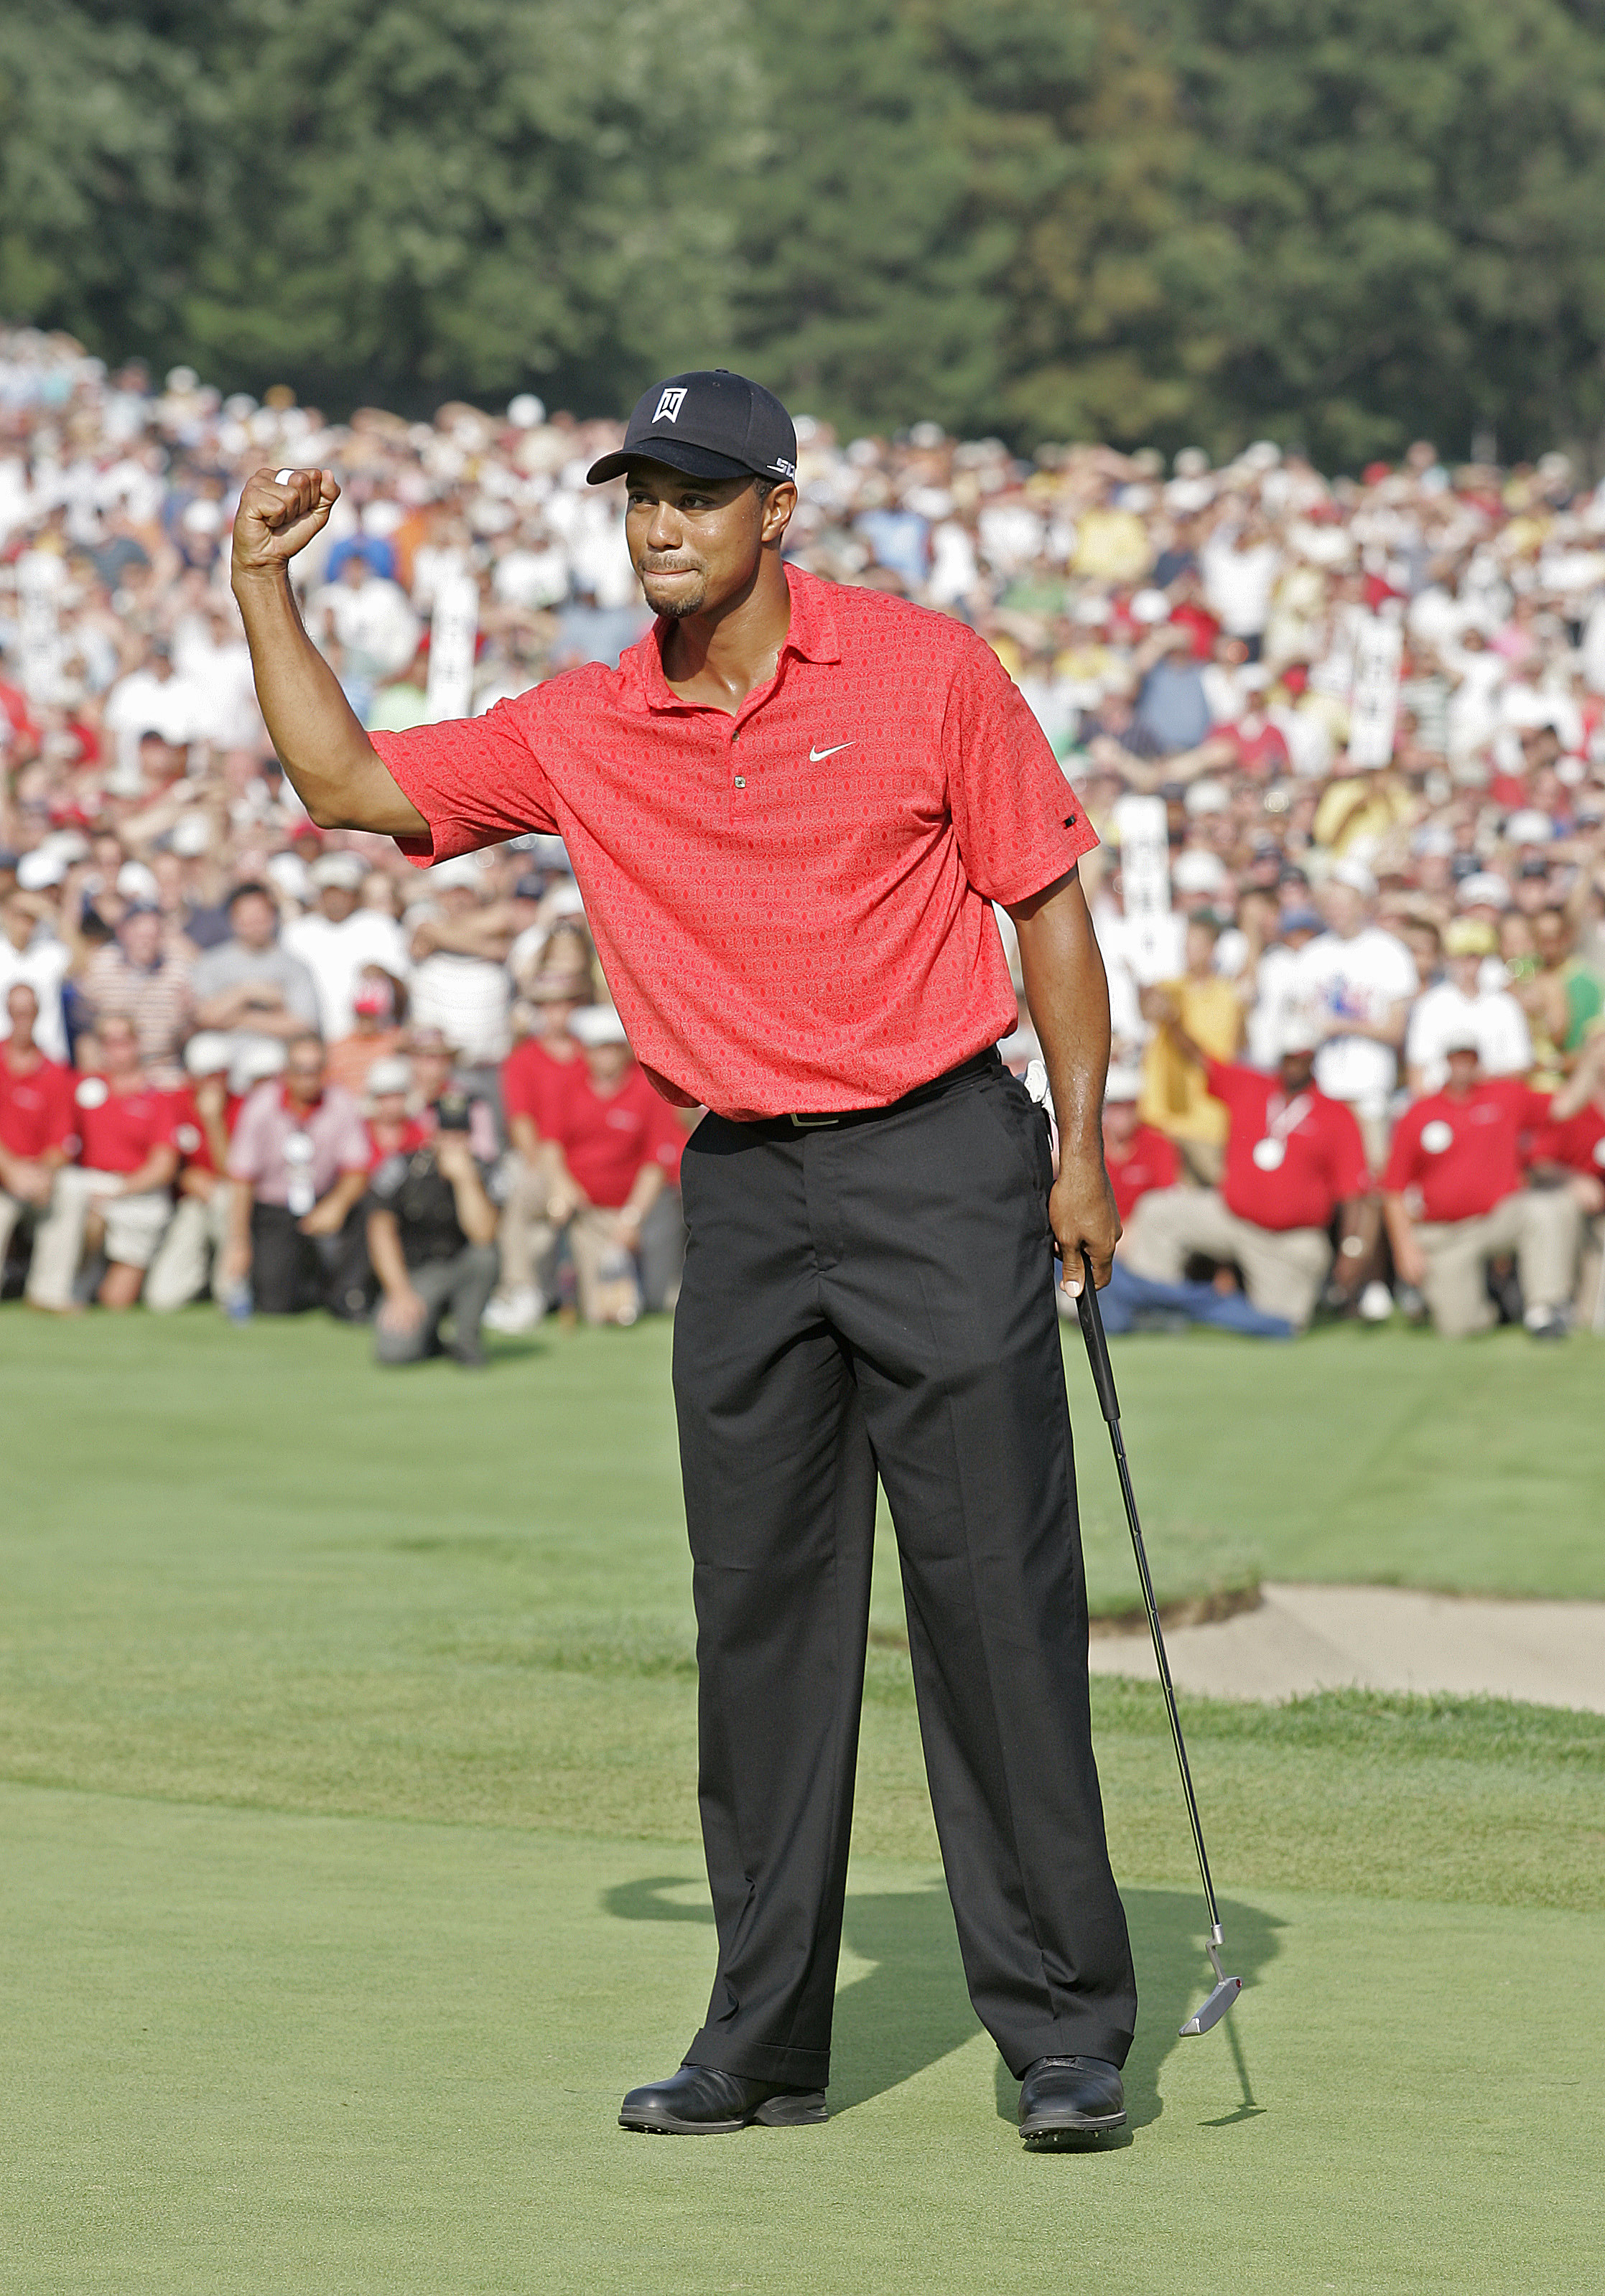 UNITED STATES - AUGUST 06:  Tiger Woods wins his 50th PGA TOUR event during the fourth and final round of the Buick Open at Warwick Hills Golf and Country Club in Grand Blanc, Michigan on August 6, 2006.  (Photo by Michael Cohen/Getty Images)